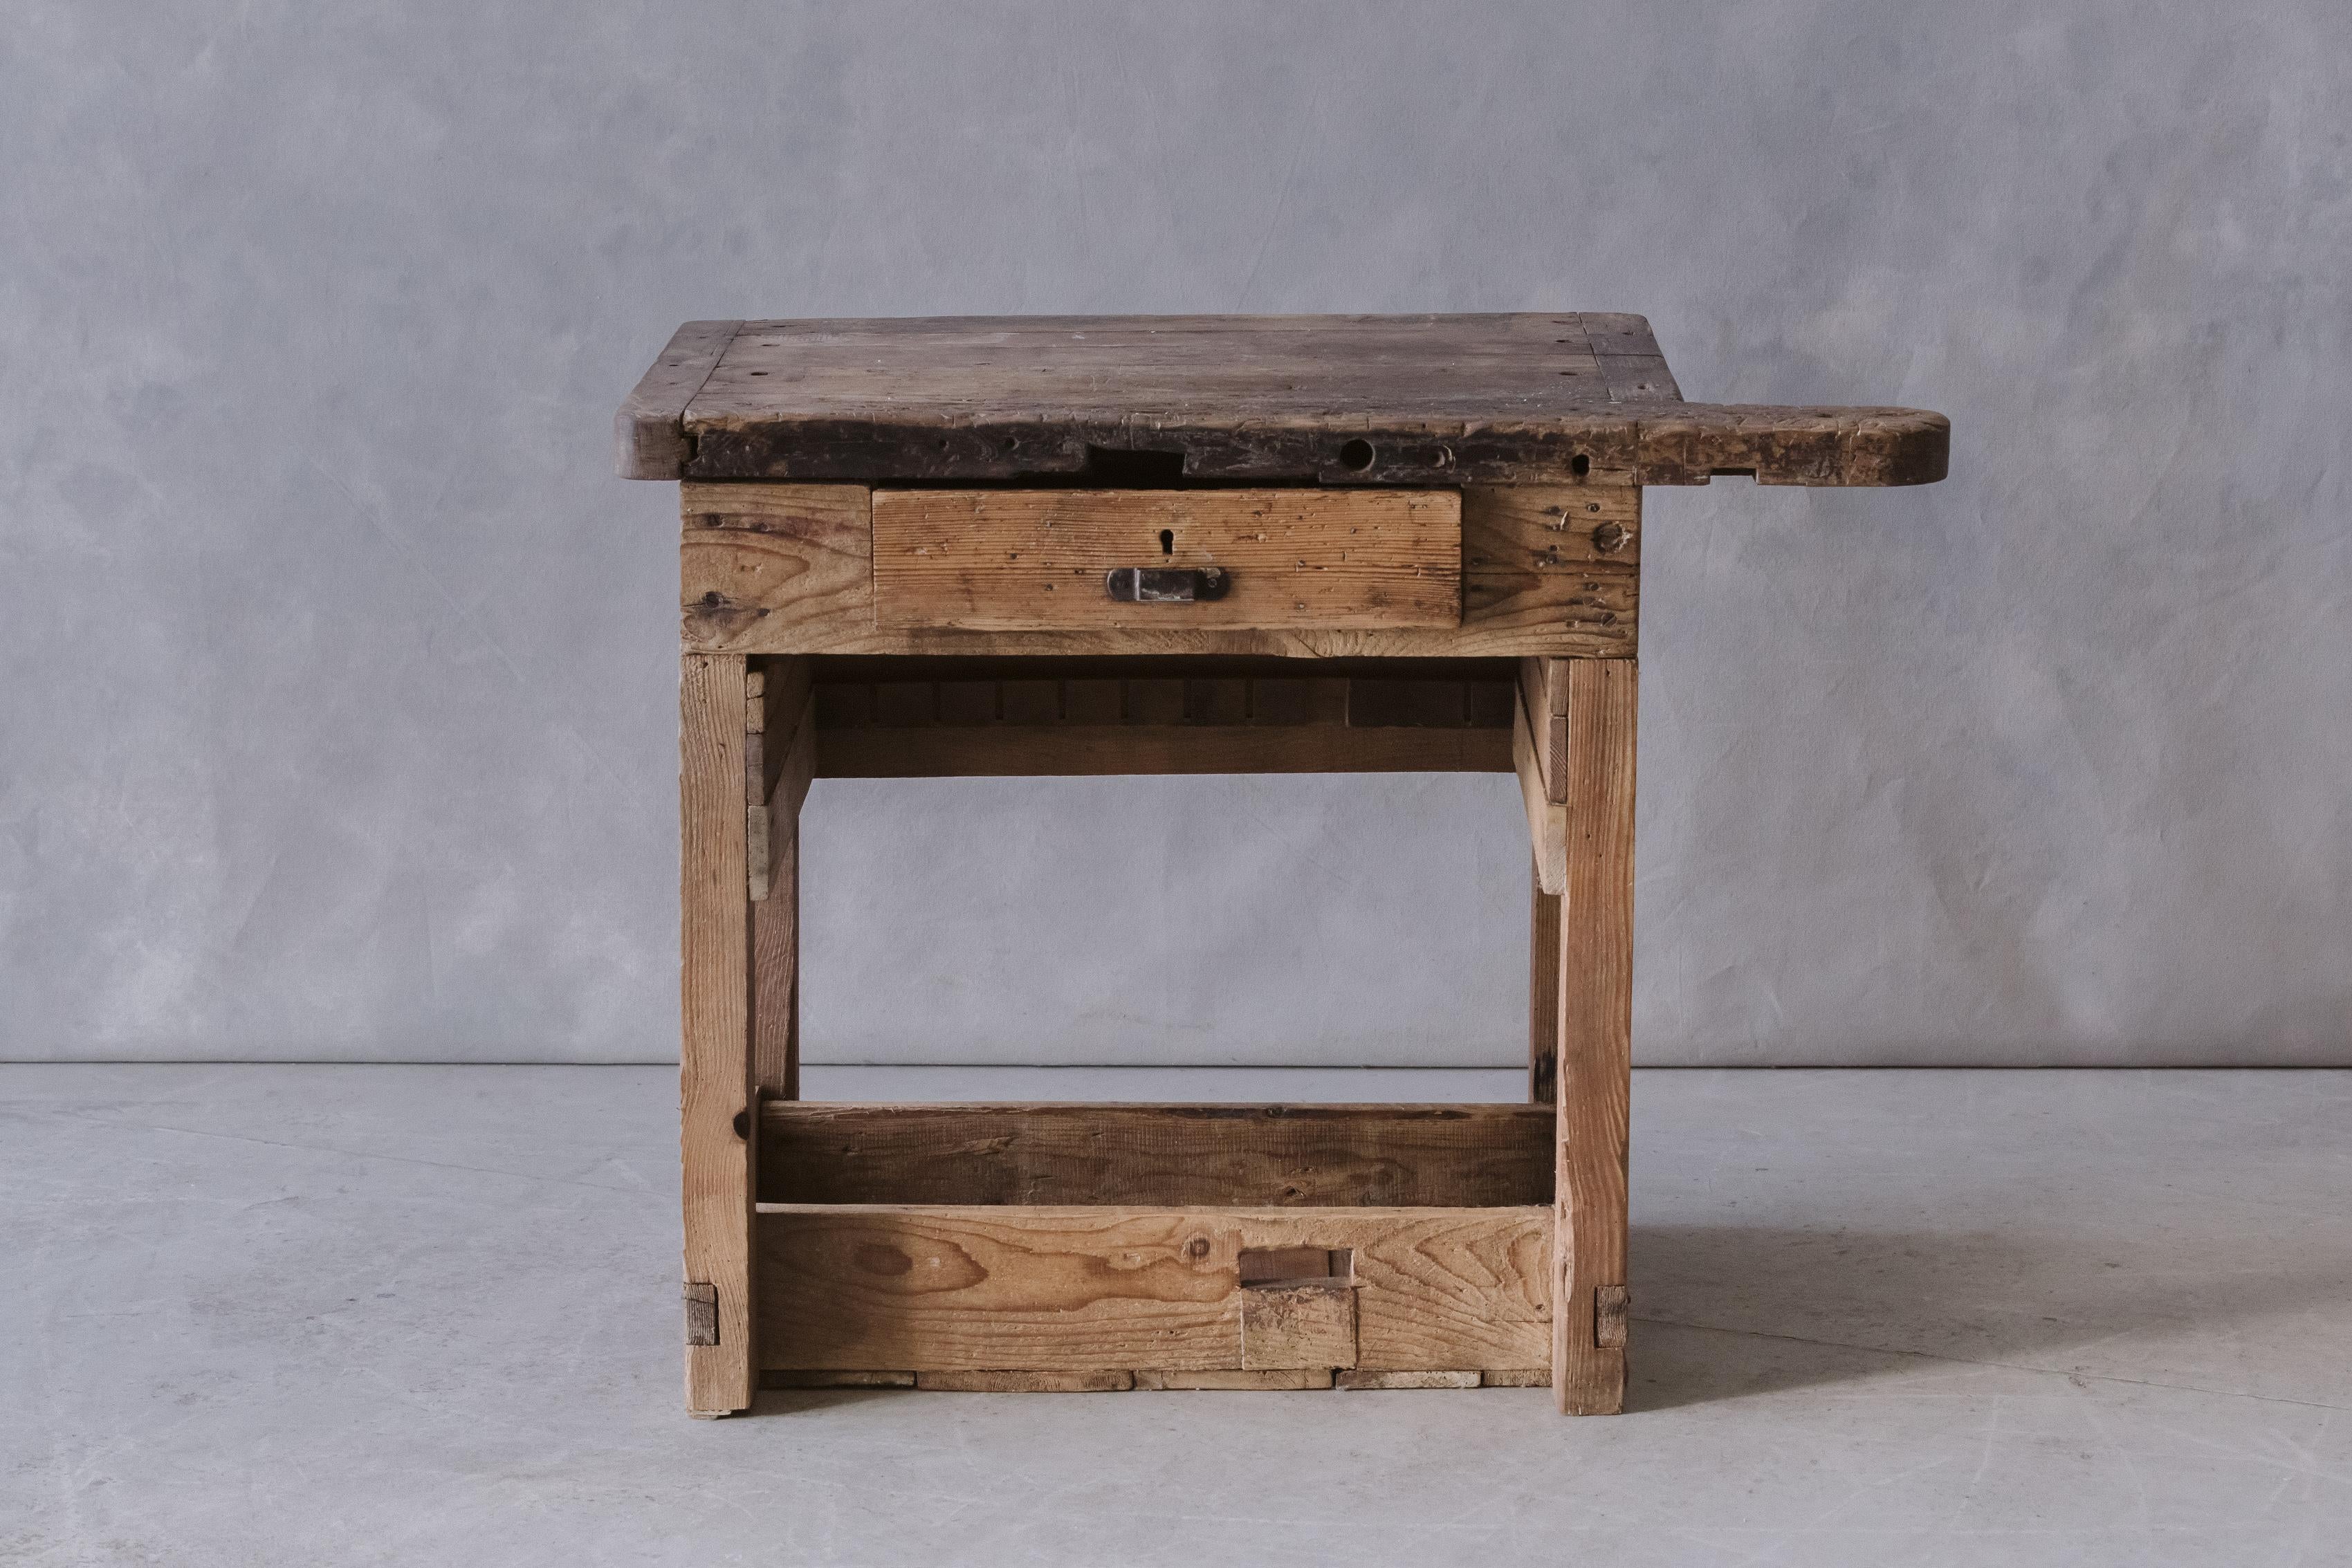 Vintage Work Console Table From France, circa 1950. Solid pine construction with fantastic use and wear.

We prefer to speak directly with our clients. So, If you have any questions or would like to know more please give us a call or drop us a